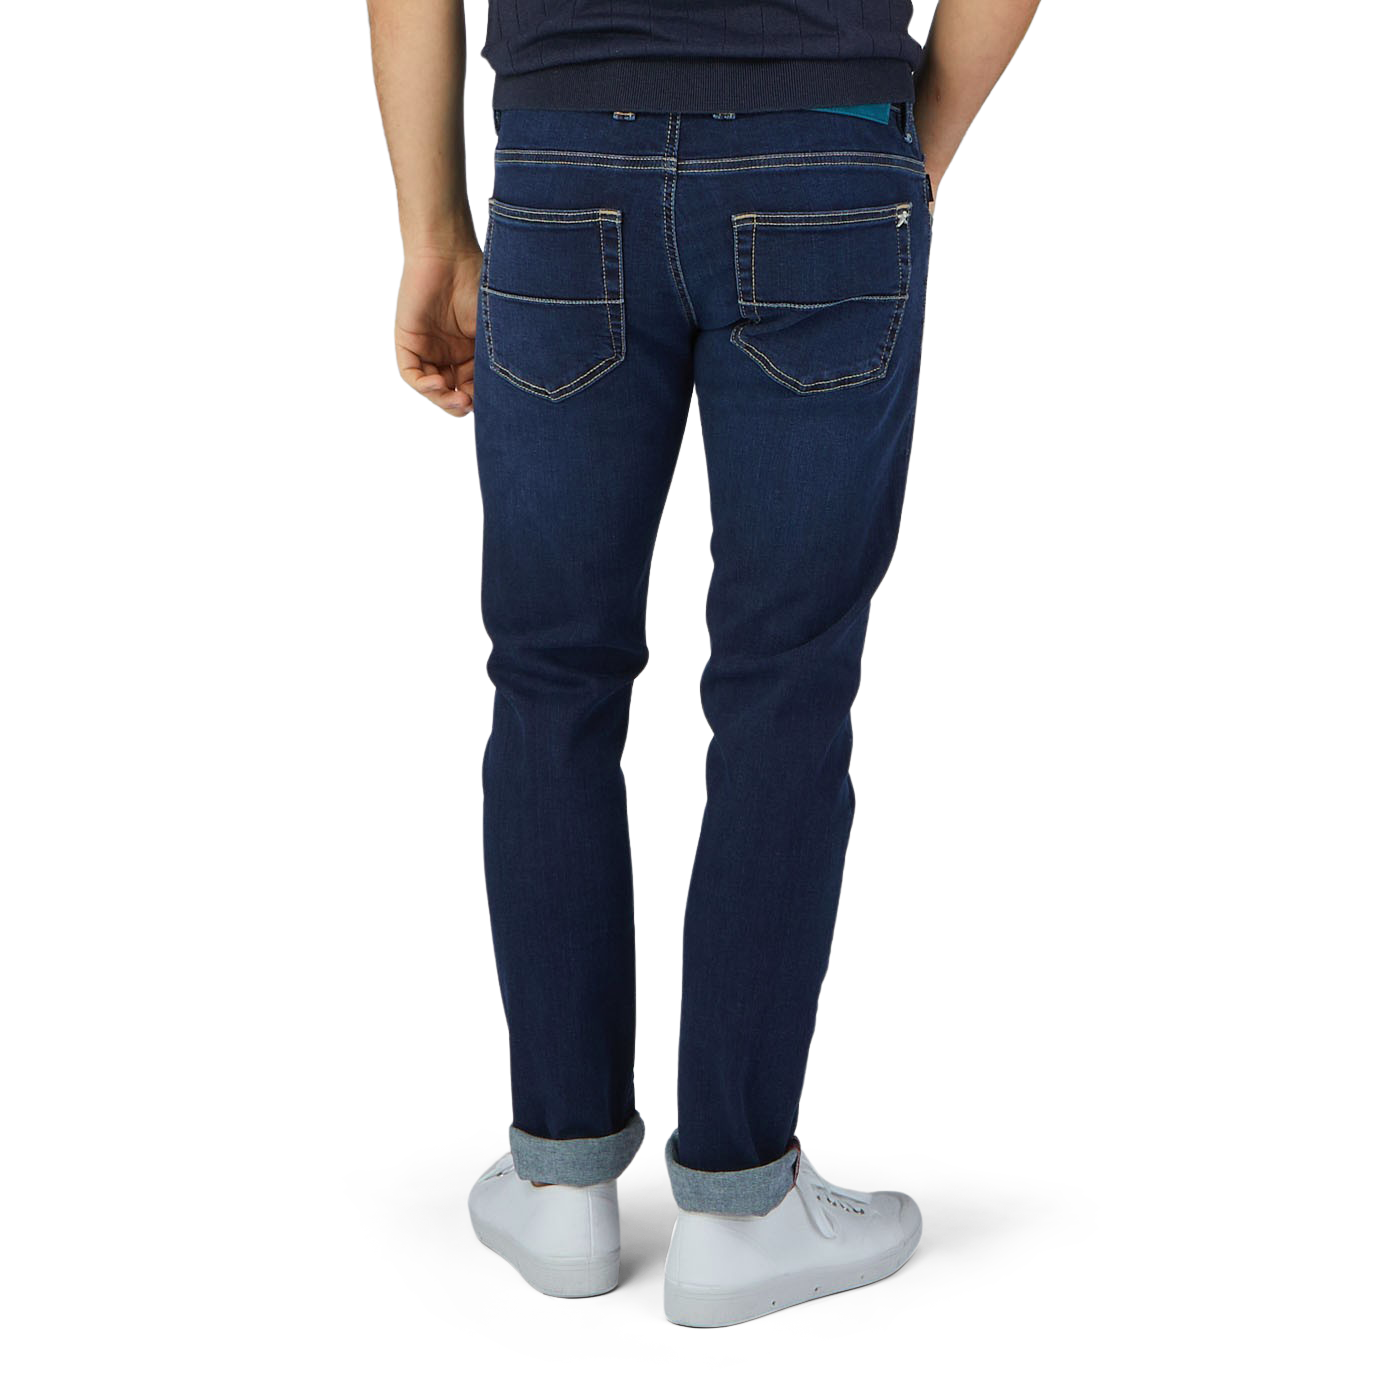 The man is wearing comfortable Dark Blue Leonardo 1 Month Jeans by Tramarossa and a white t-shirt as seen from the back.